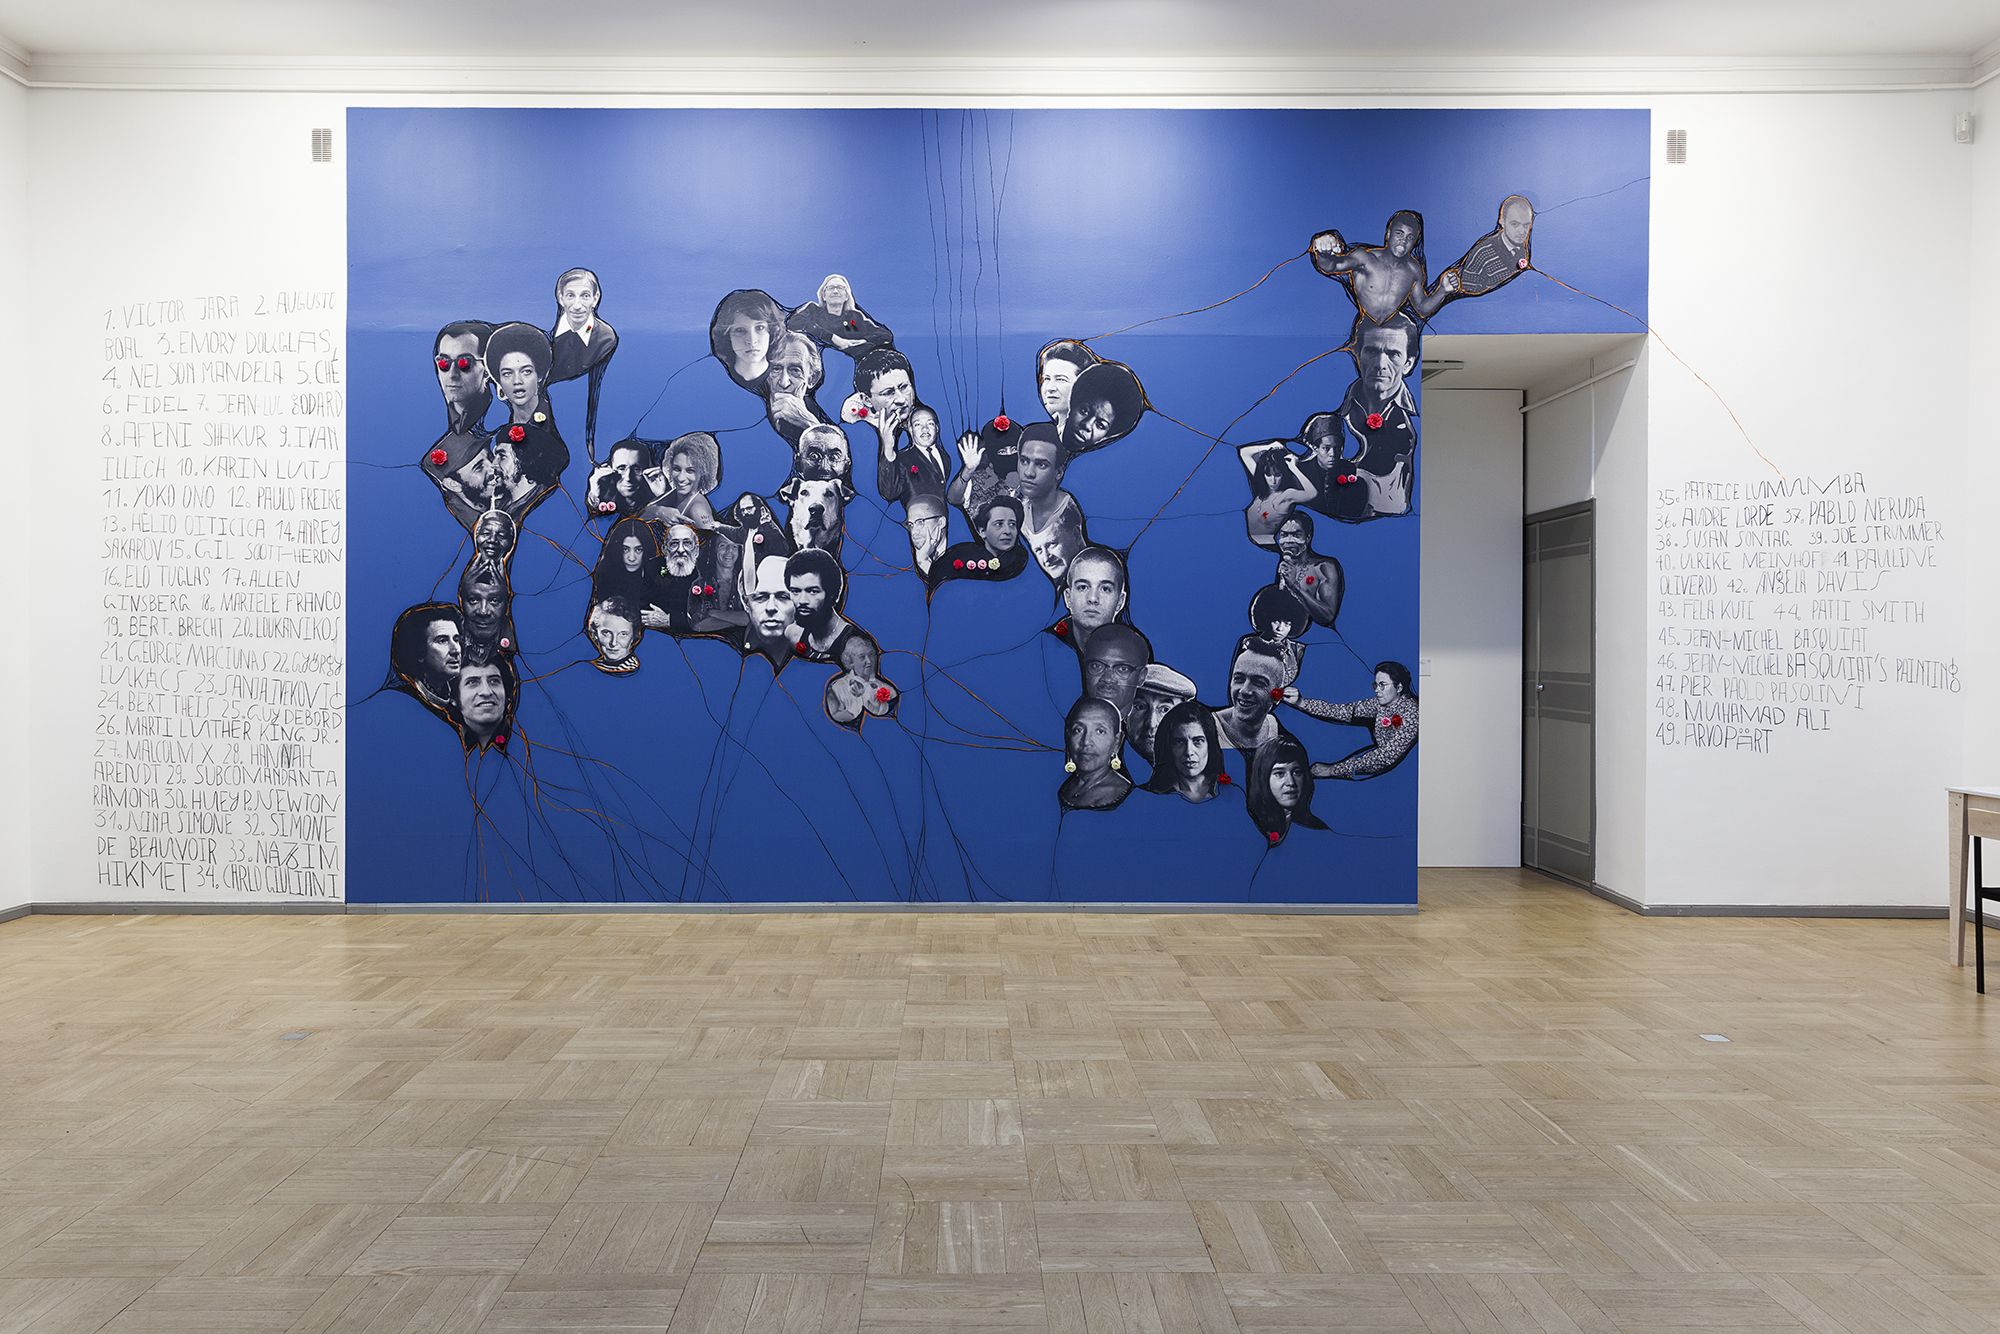 A bright blue mural featuring portraits of historical figures